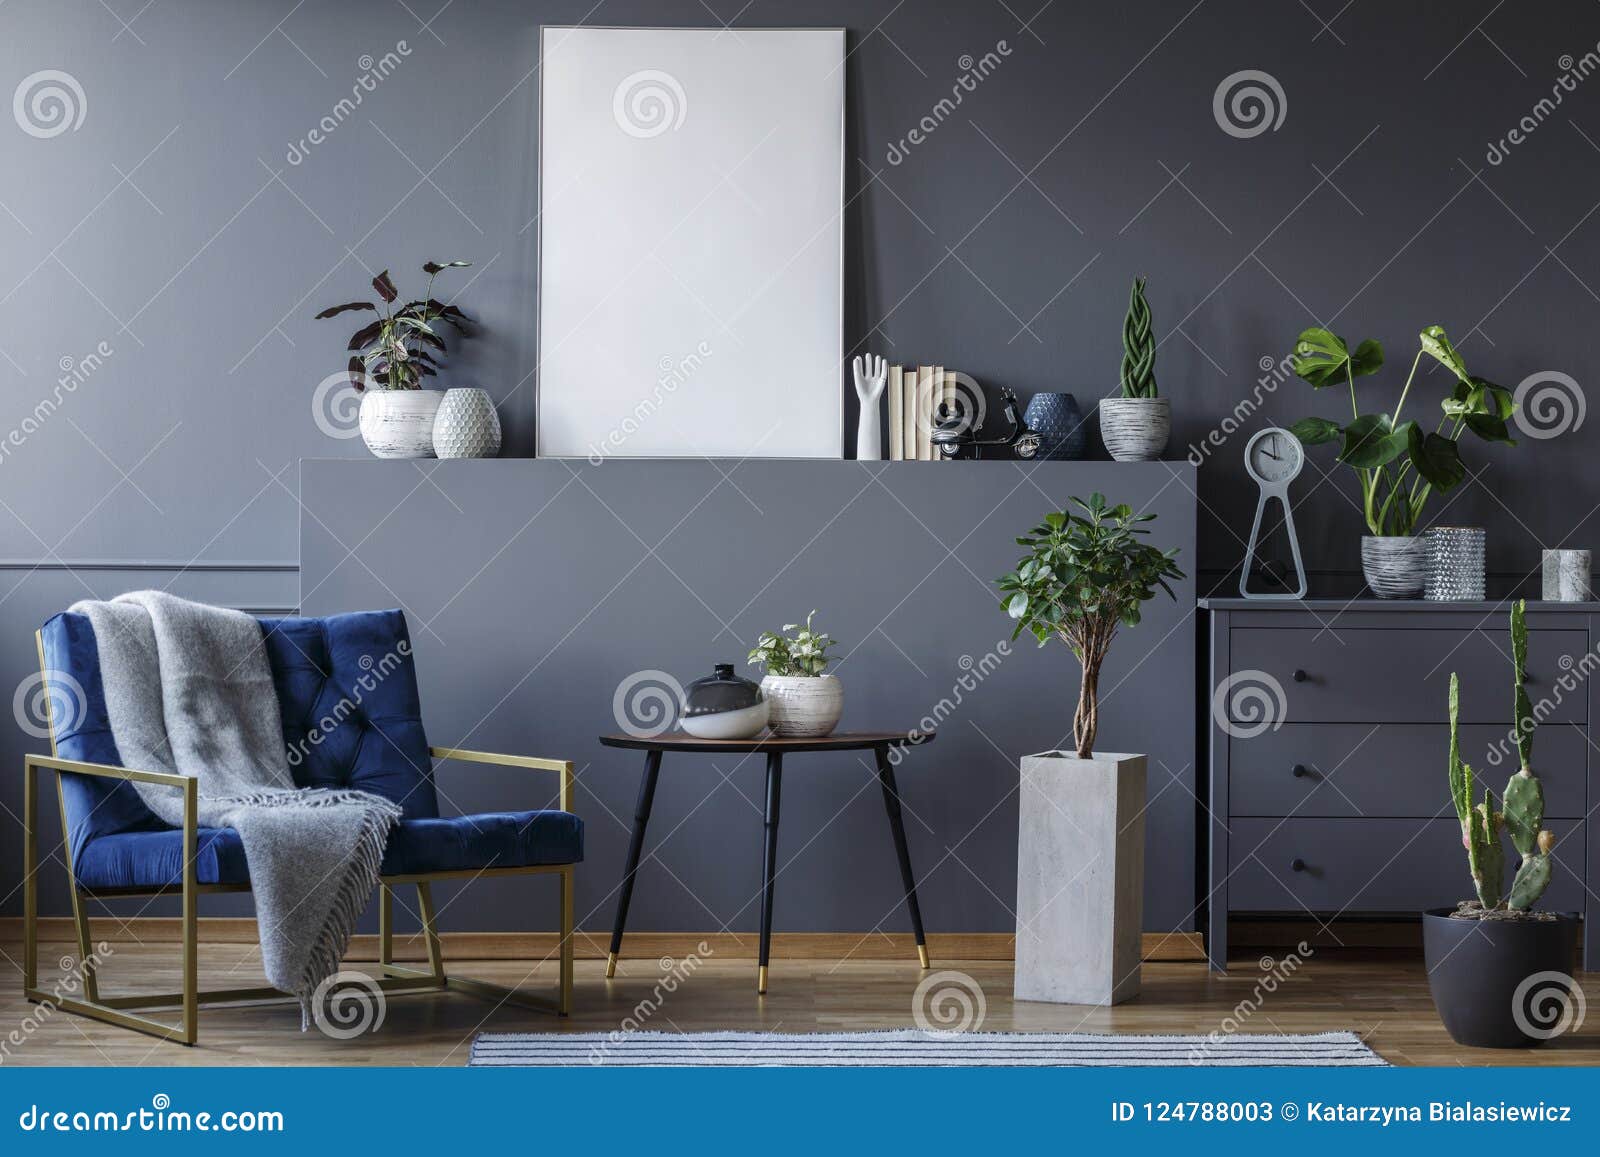 Real Photo Of A Monochromatic Living Room Interior With A